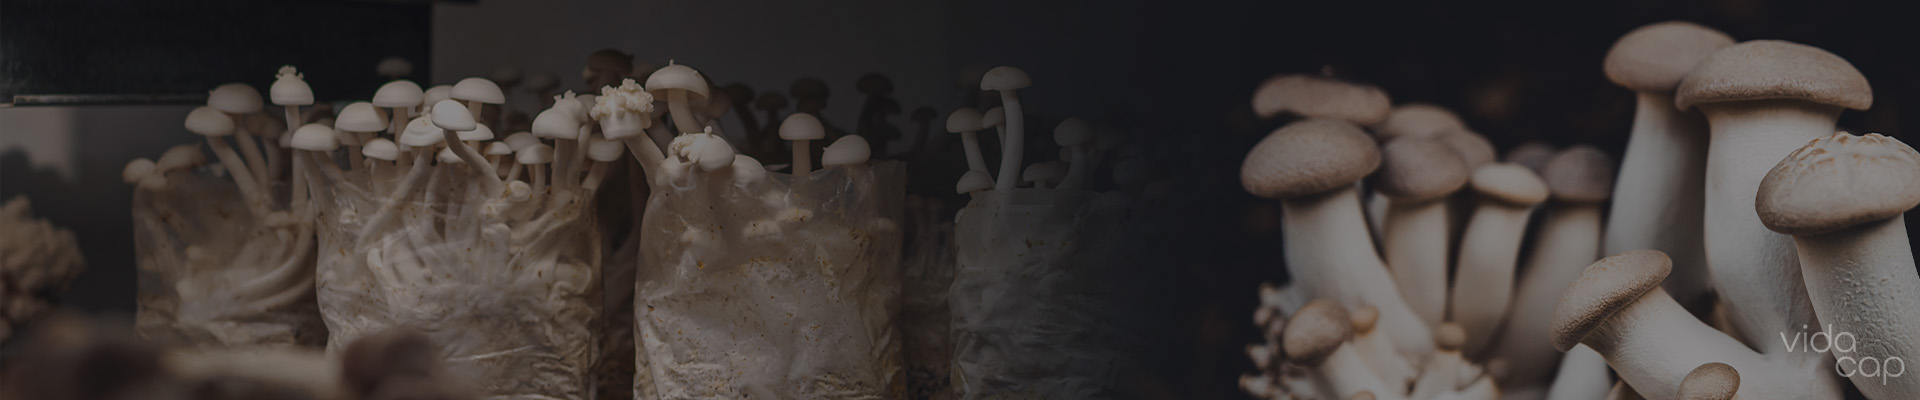 vc-banner-how_to_grow_mushrooms